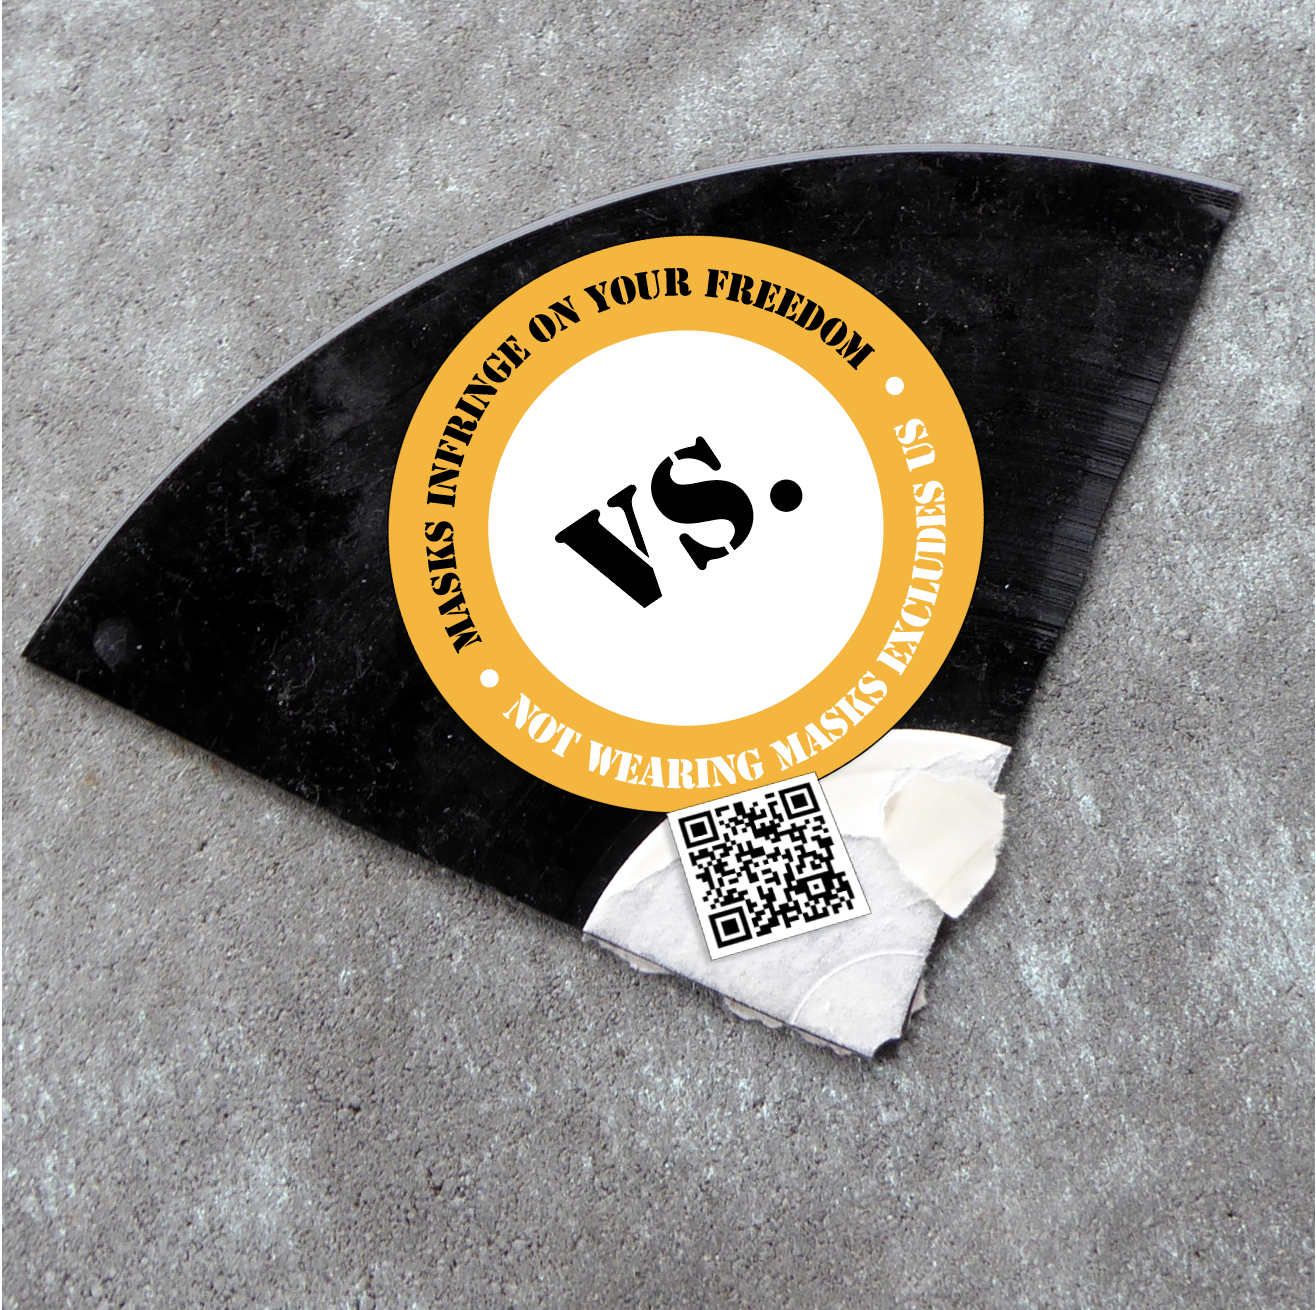 A shard of a record with a sticker on it that reads "Masks infringe on your freedom vs. Not wearing masks excludes us". Next to it there's a QR-code that leads to our zine: An Open Letter to our Comrades